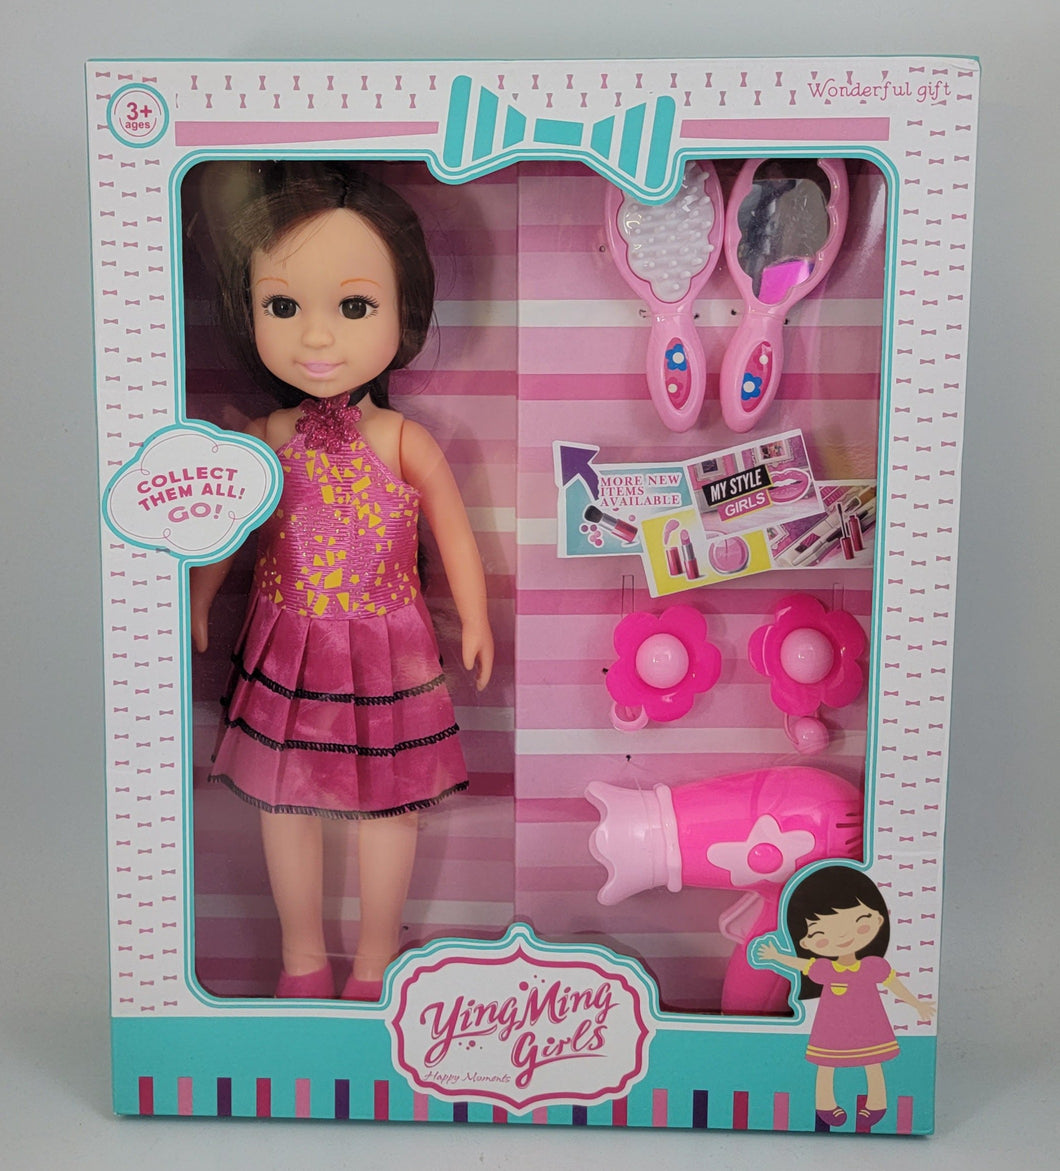 Ying Ming Girls Happy Moments Asian Female Doll NEW, Pink Dress